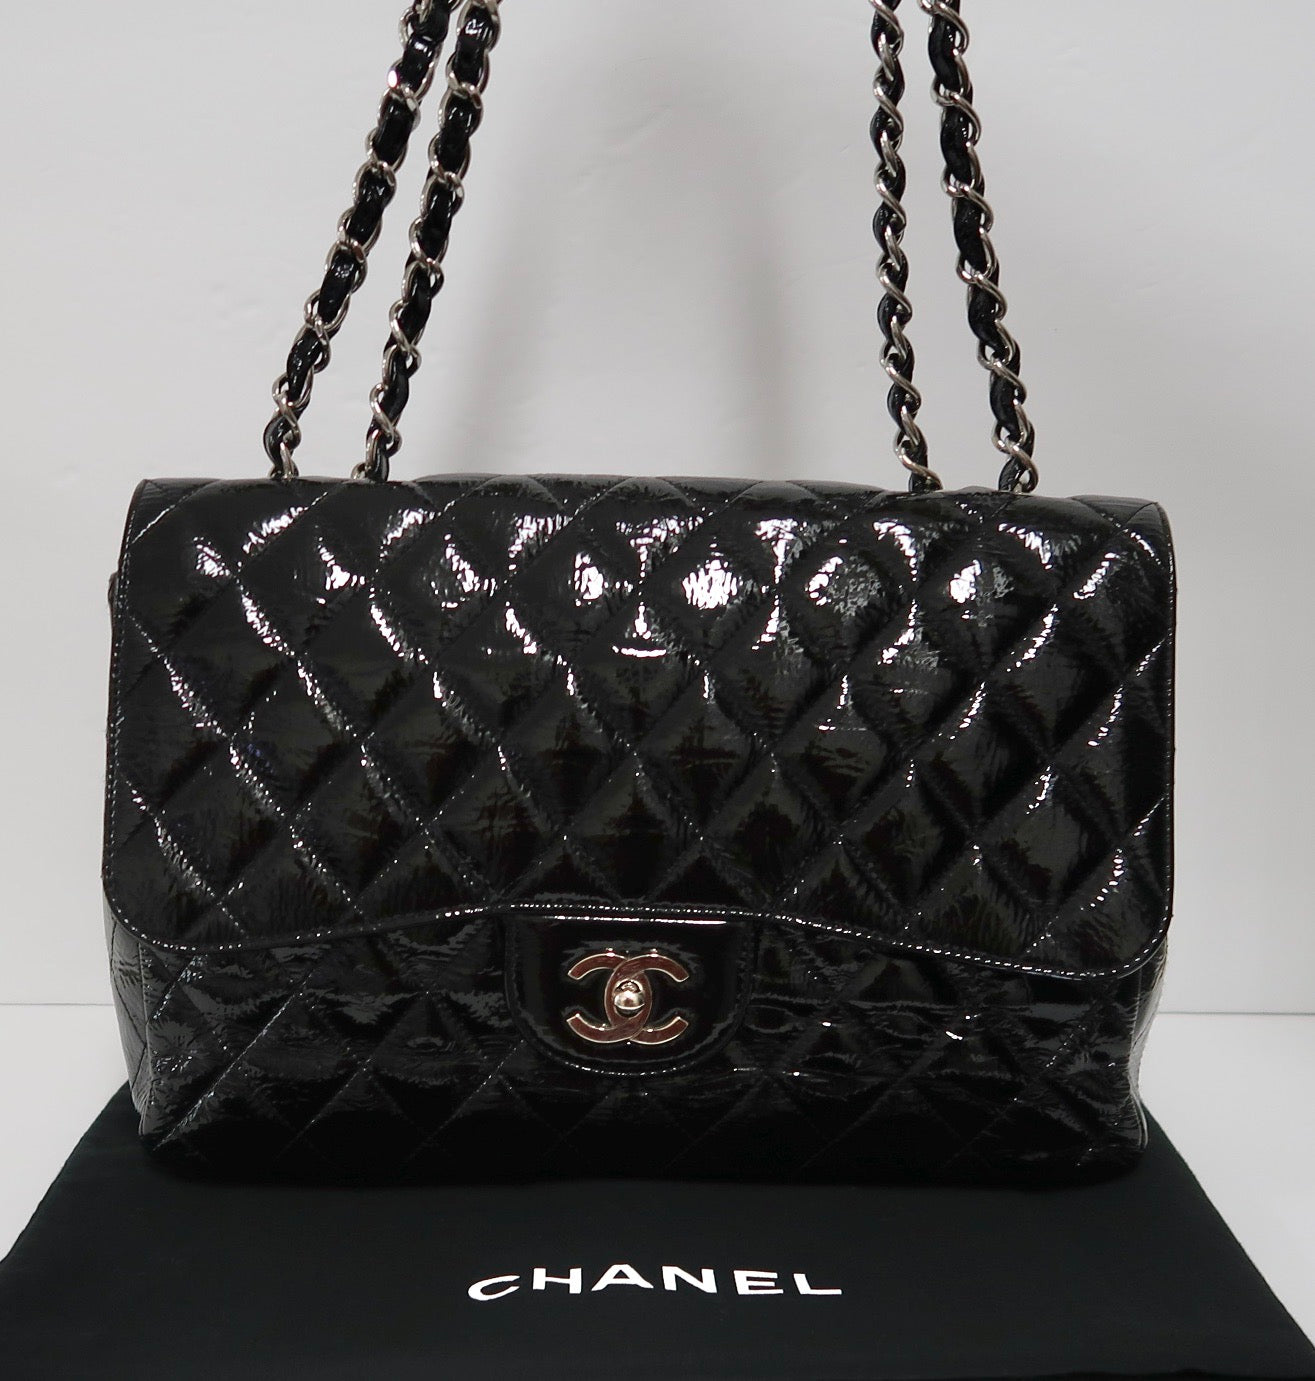 Authentic Chanel 21S Arm Coin Purse Lambskin Black Quilted Pouch Mini Bag  Boxed | eBay